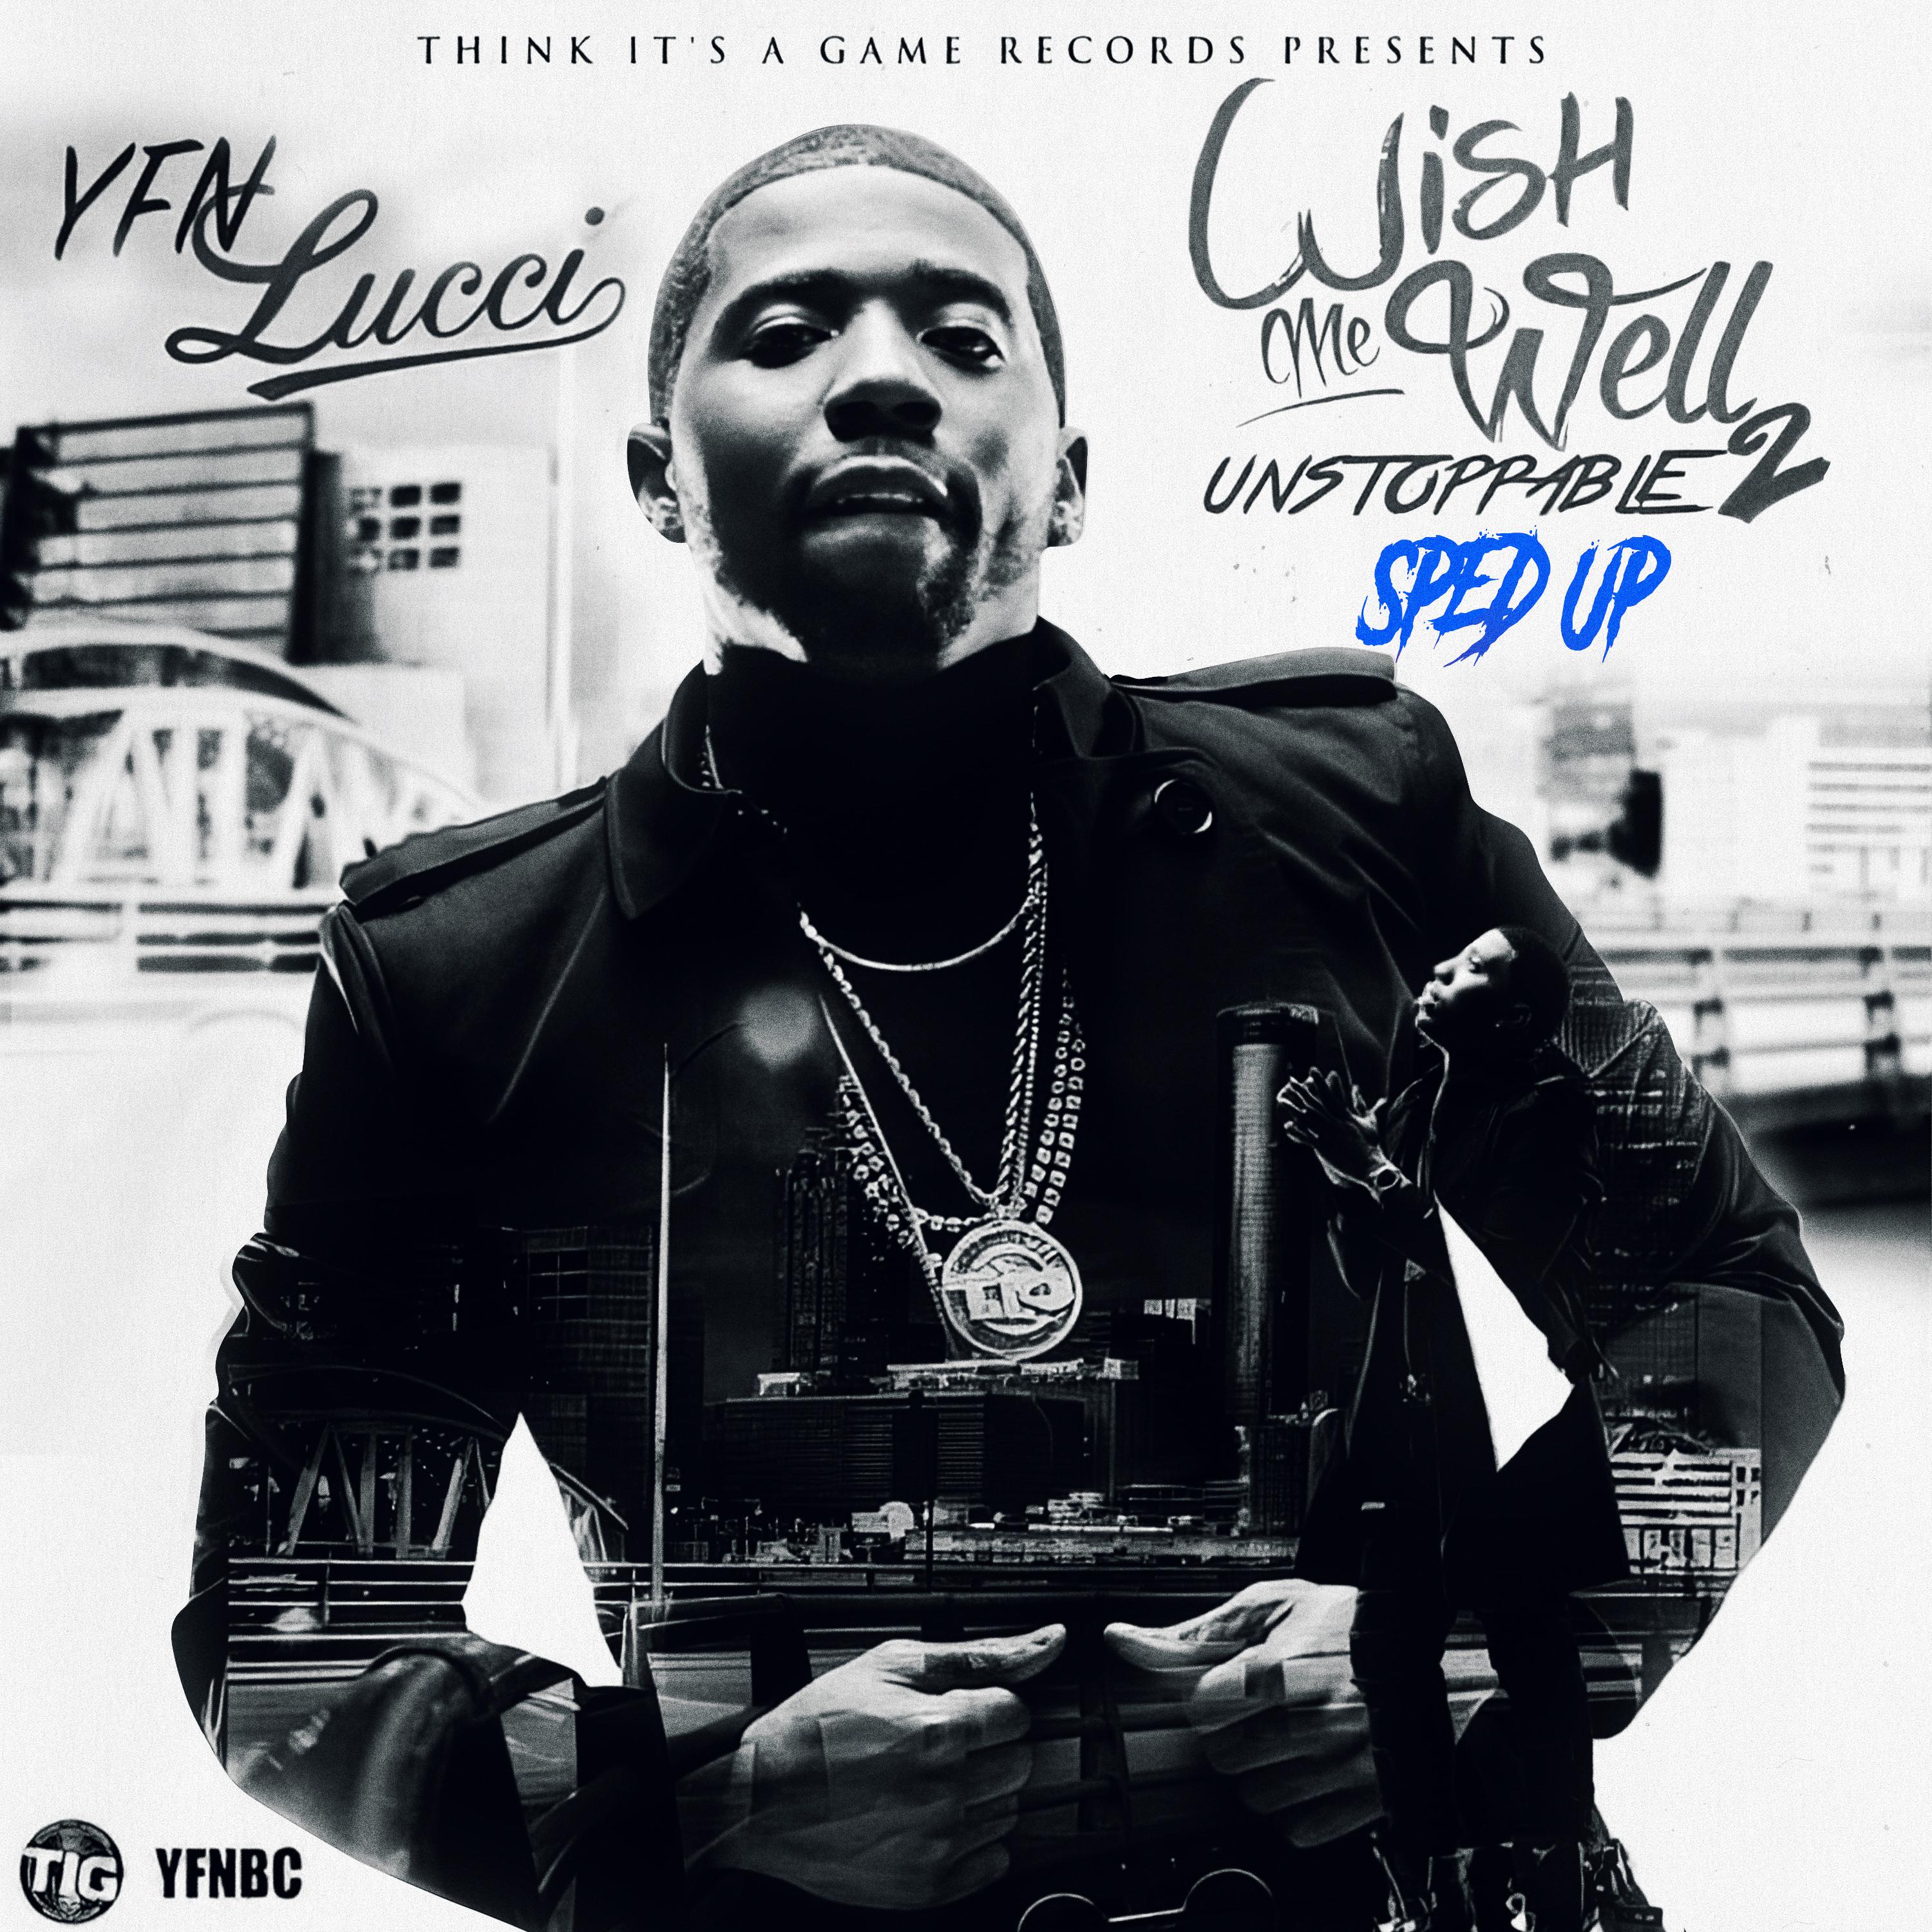 YFN Lucci - Key to the Streets (feat. Migos & Trouble) (Sped Up)